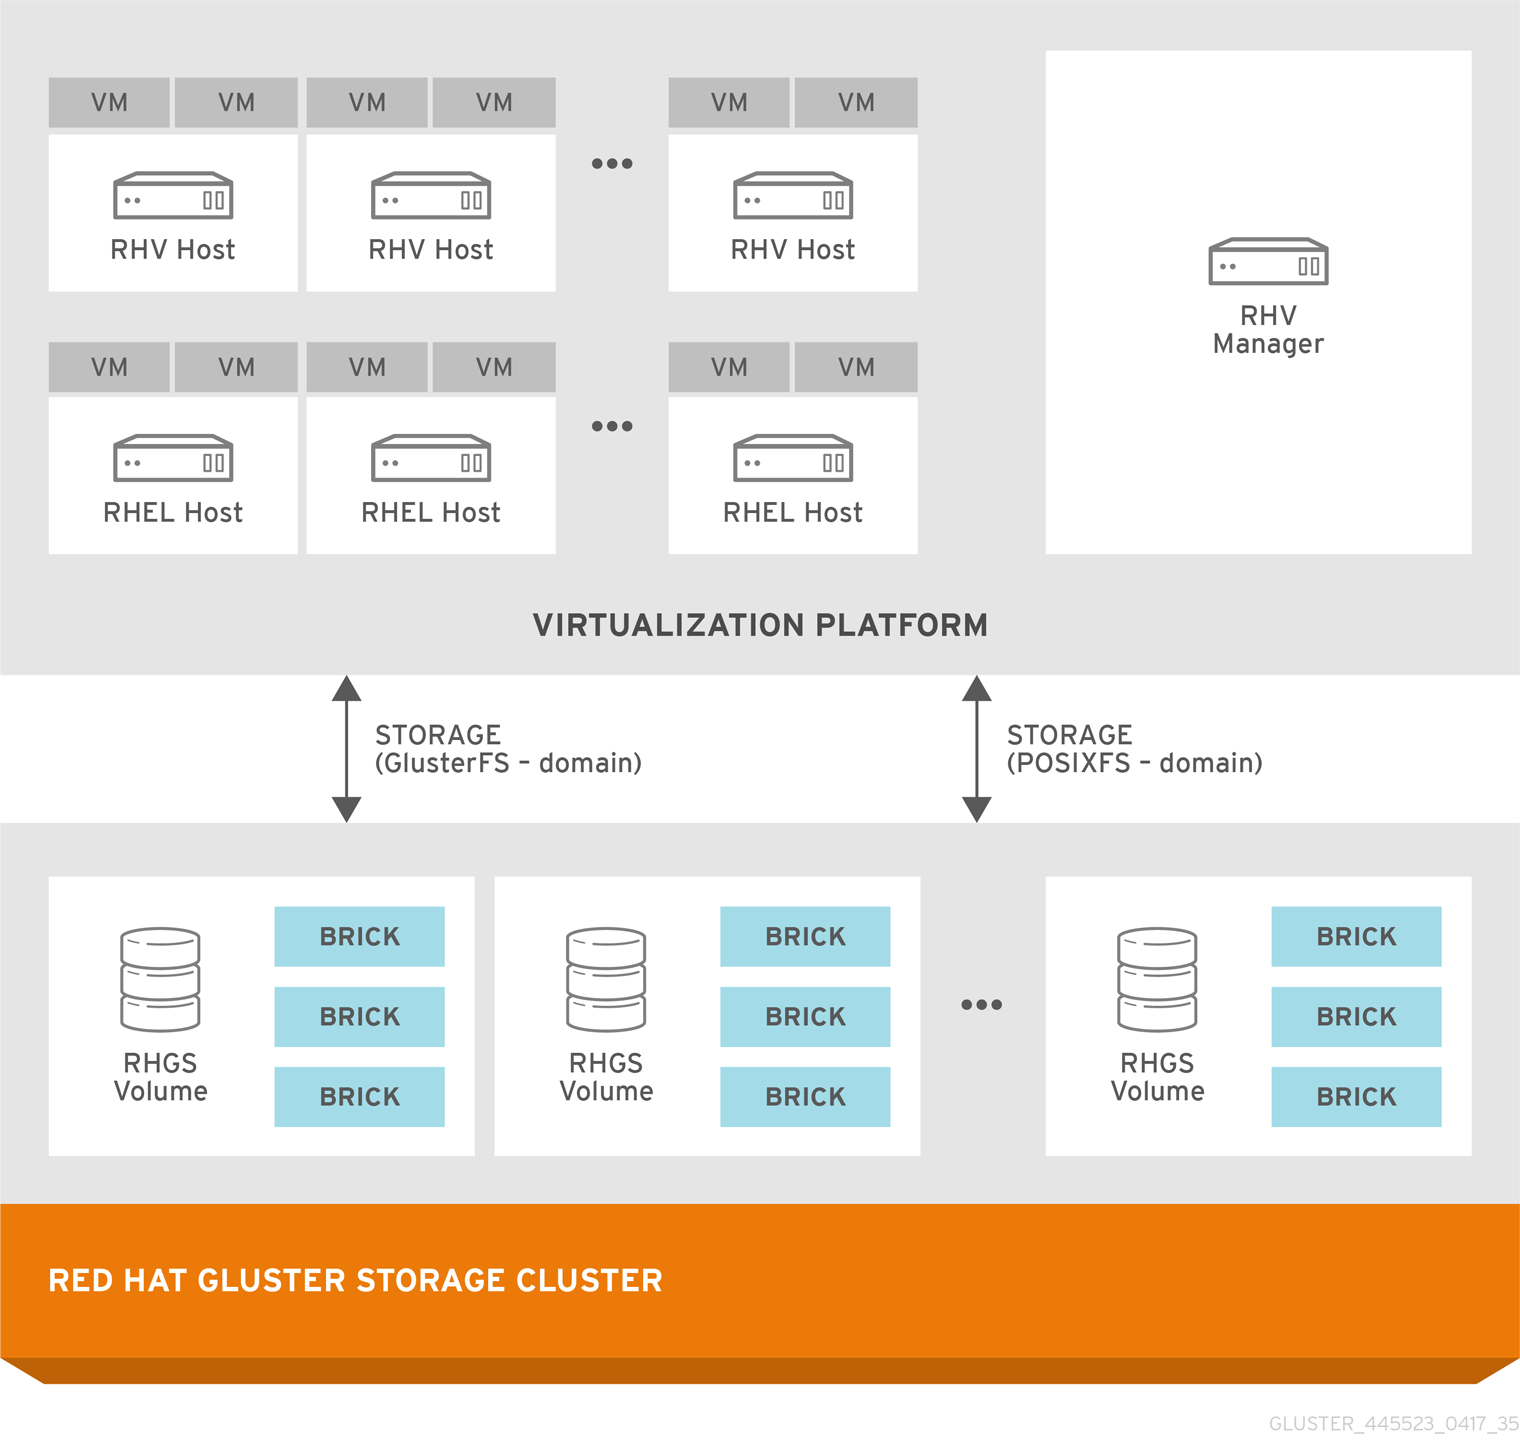 Architecture of integrated Red Hat Virtualization and Red Hat Gluster Storage